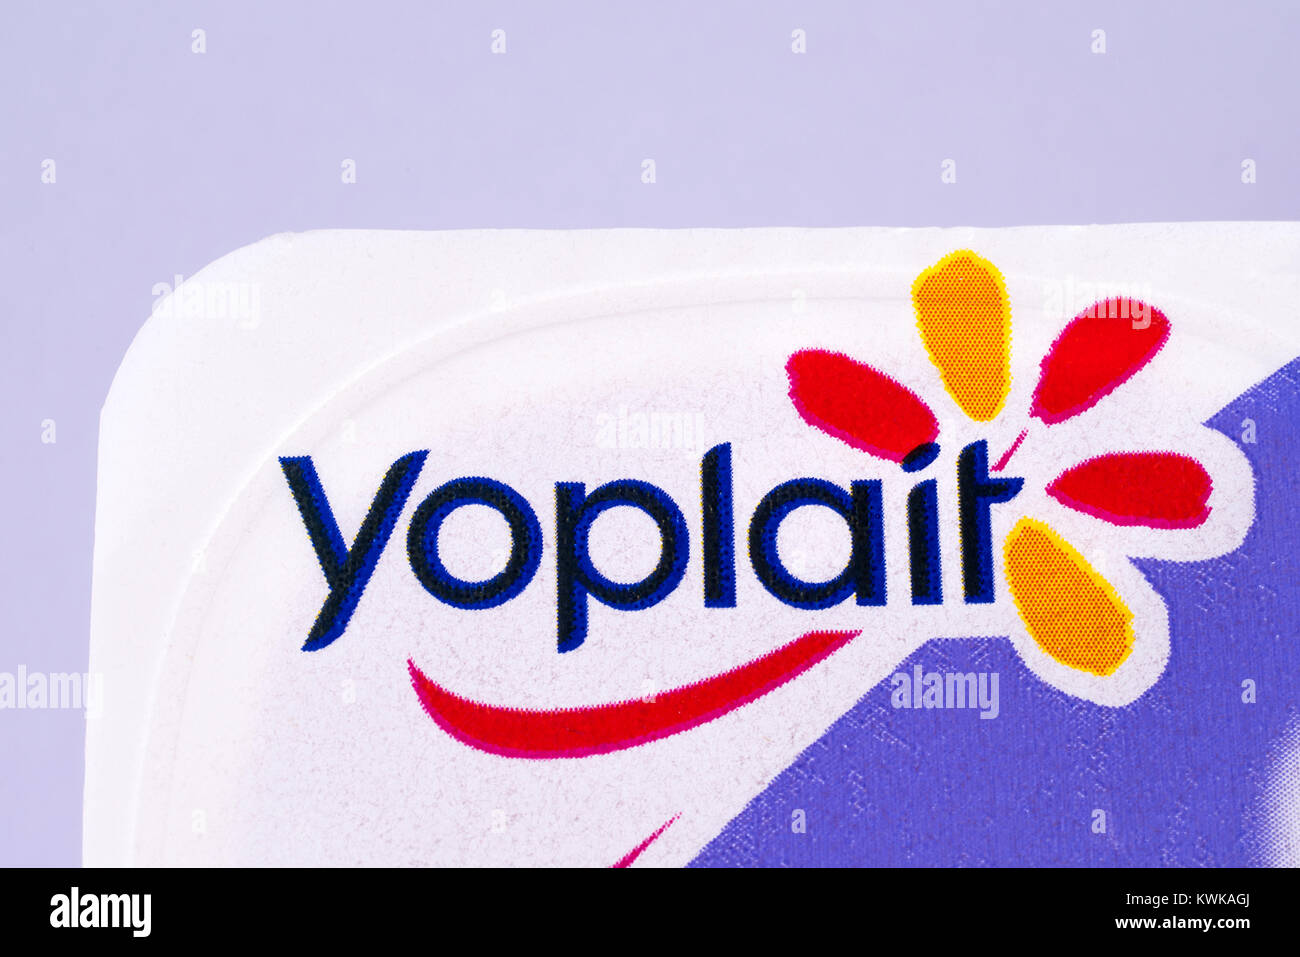 LONDON, UK - DECEMBER 18TH 2017: A close-up of the Yoplait logo, on 18th December 2017.  Yoplait is the largest franchise brand of yoghurt owned by bo Stock Photo